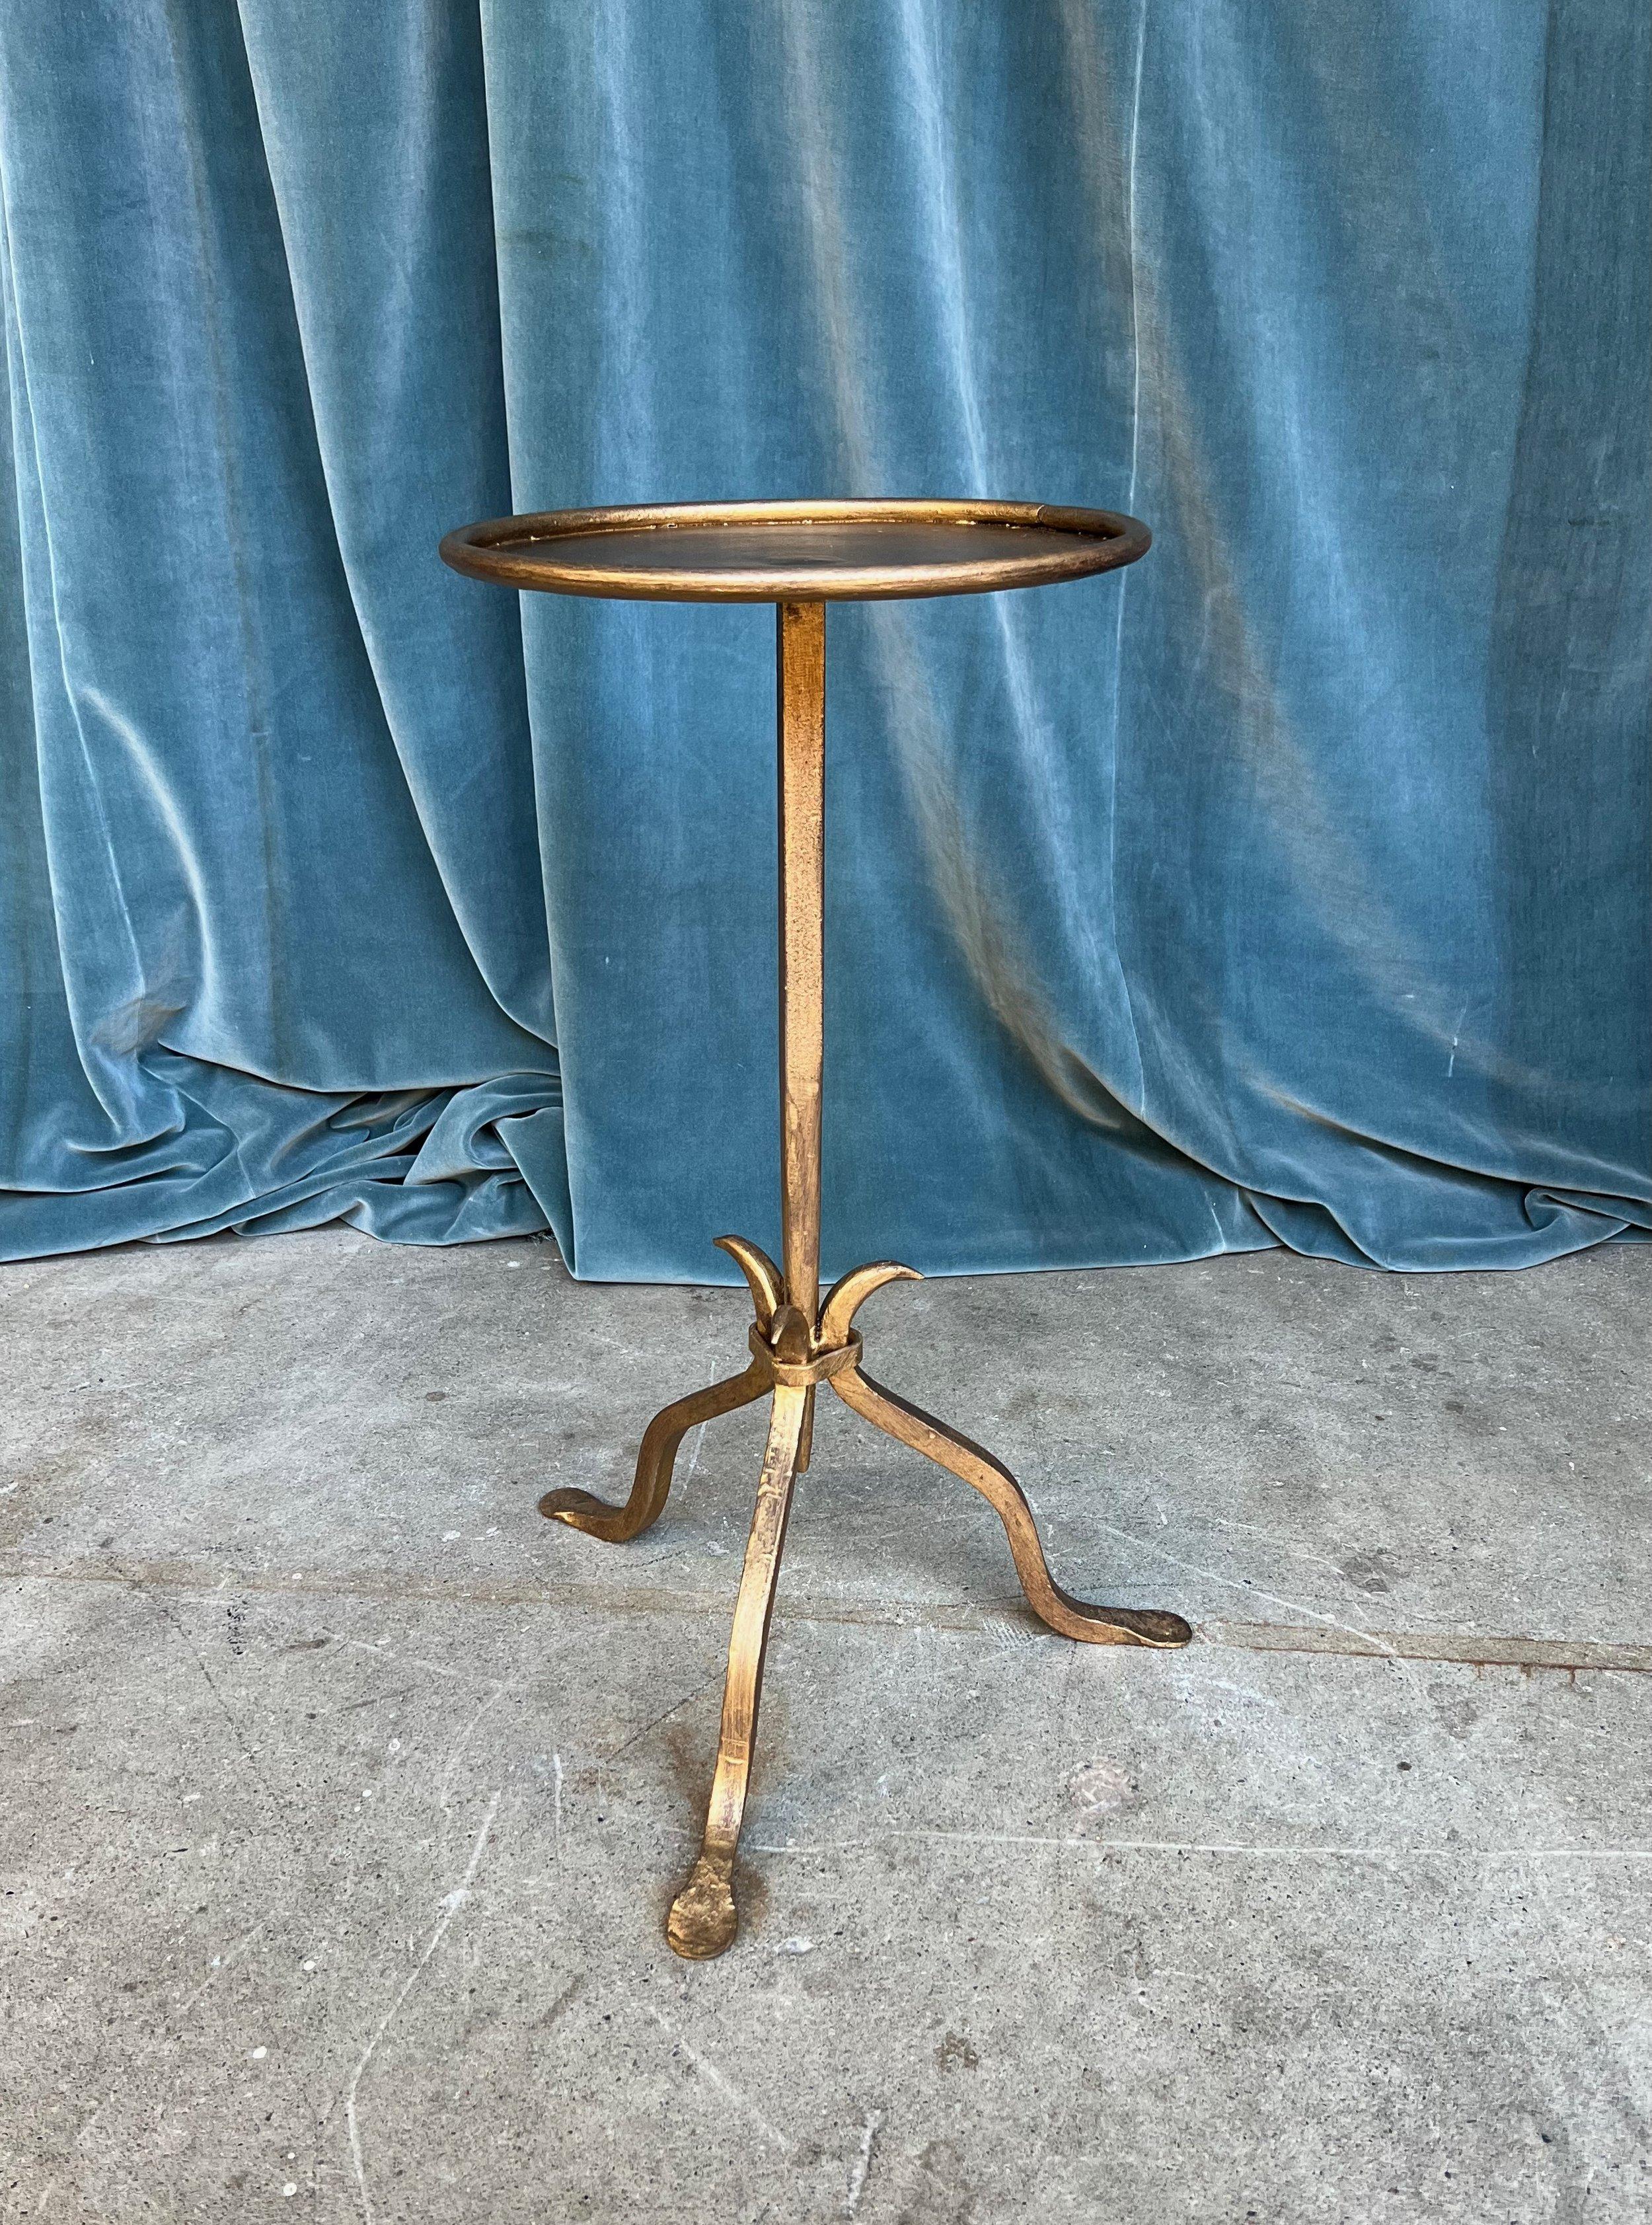 This lovely recently fabricated Spanish iron side table has a hand-applied gold patina that lends a sophisticated aura to any room. Created by accomplished artisans using traditional iron-working methods, the table features a distinctive design with